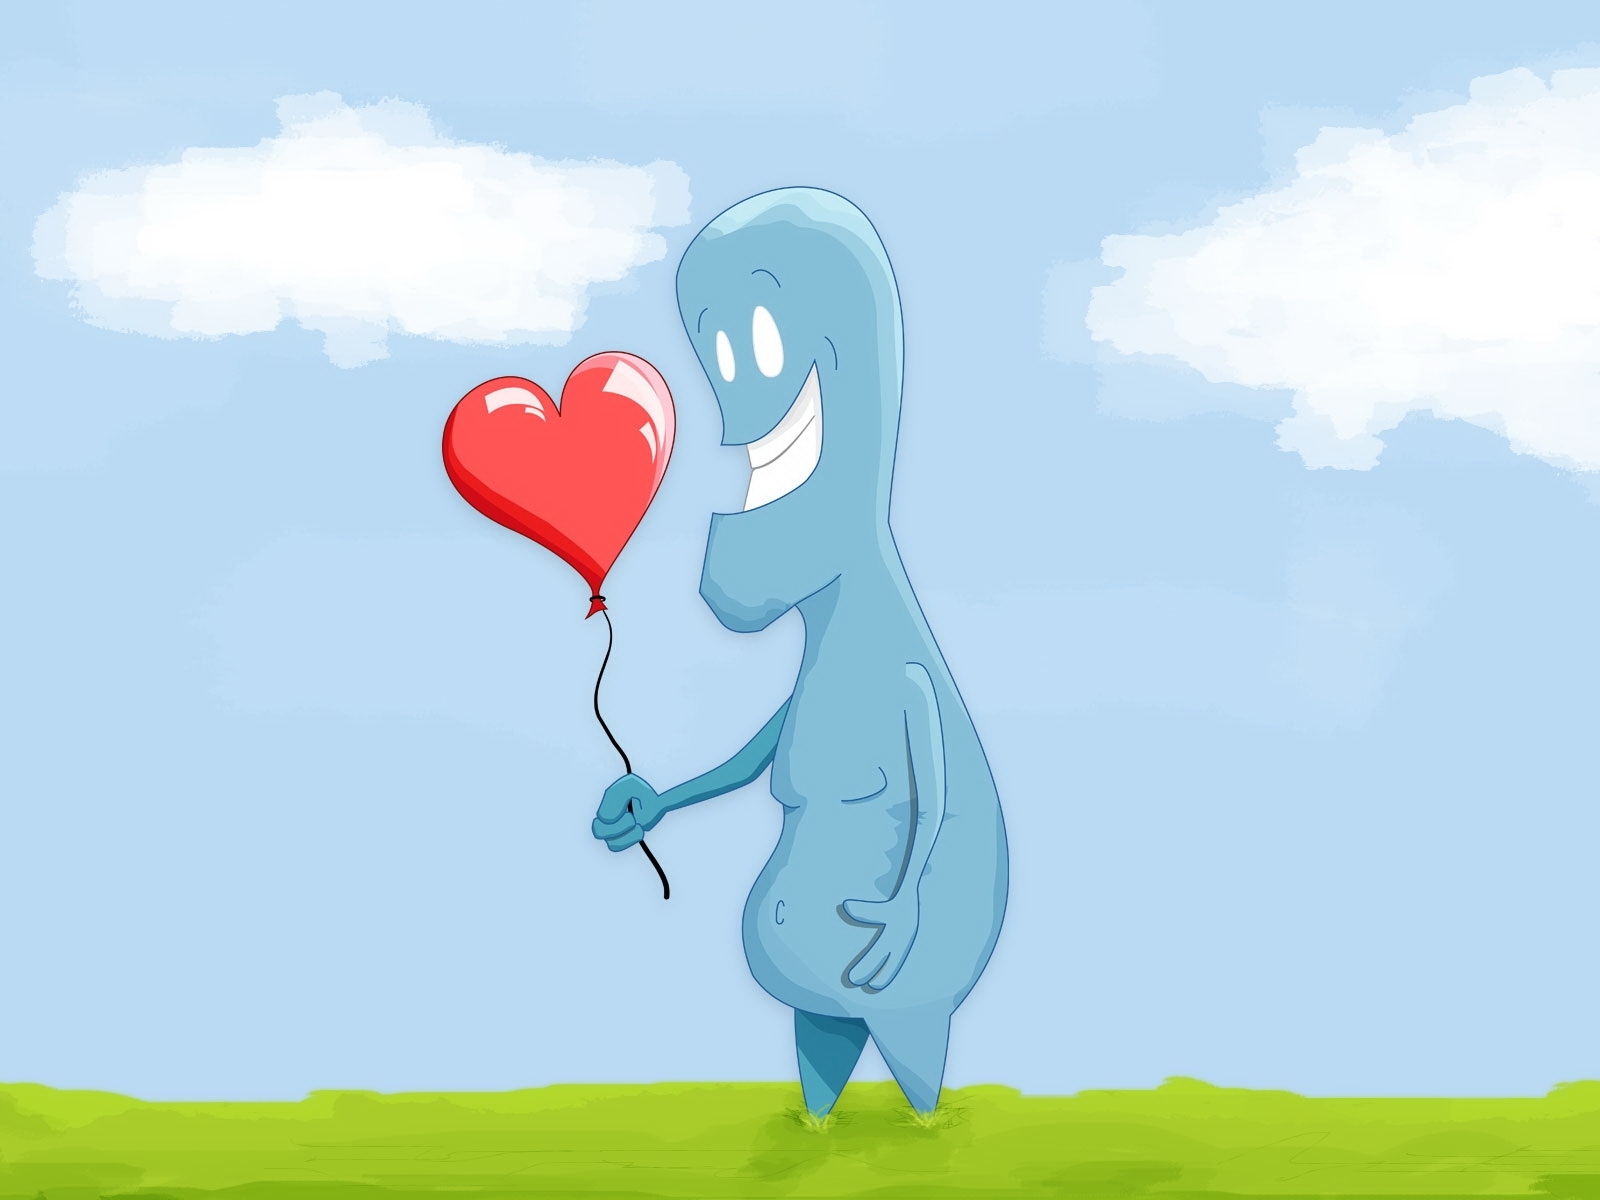 hearts, love, valentine's day, pictures, blue Image for desktop